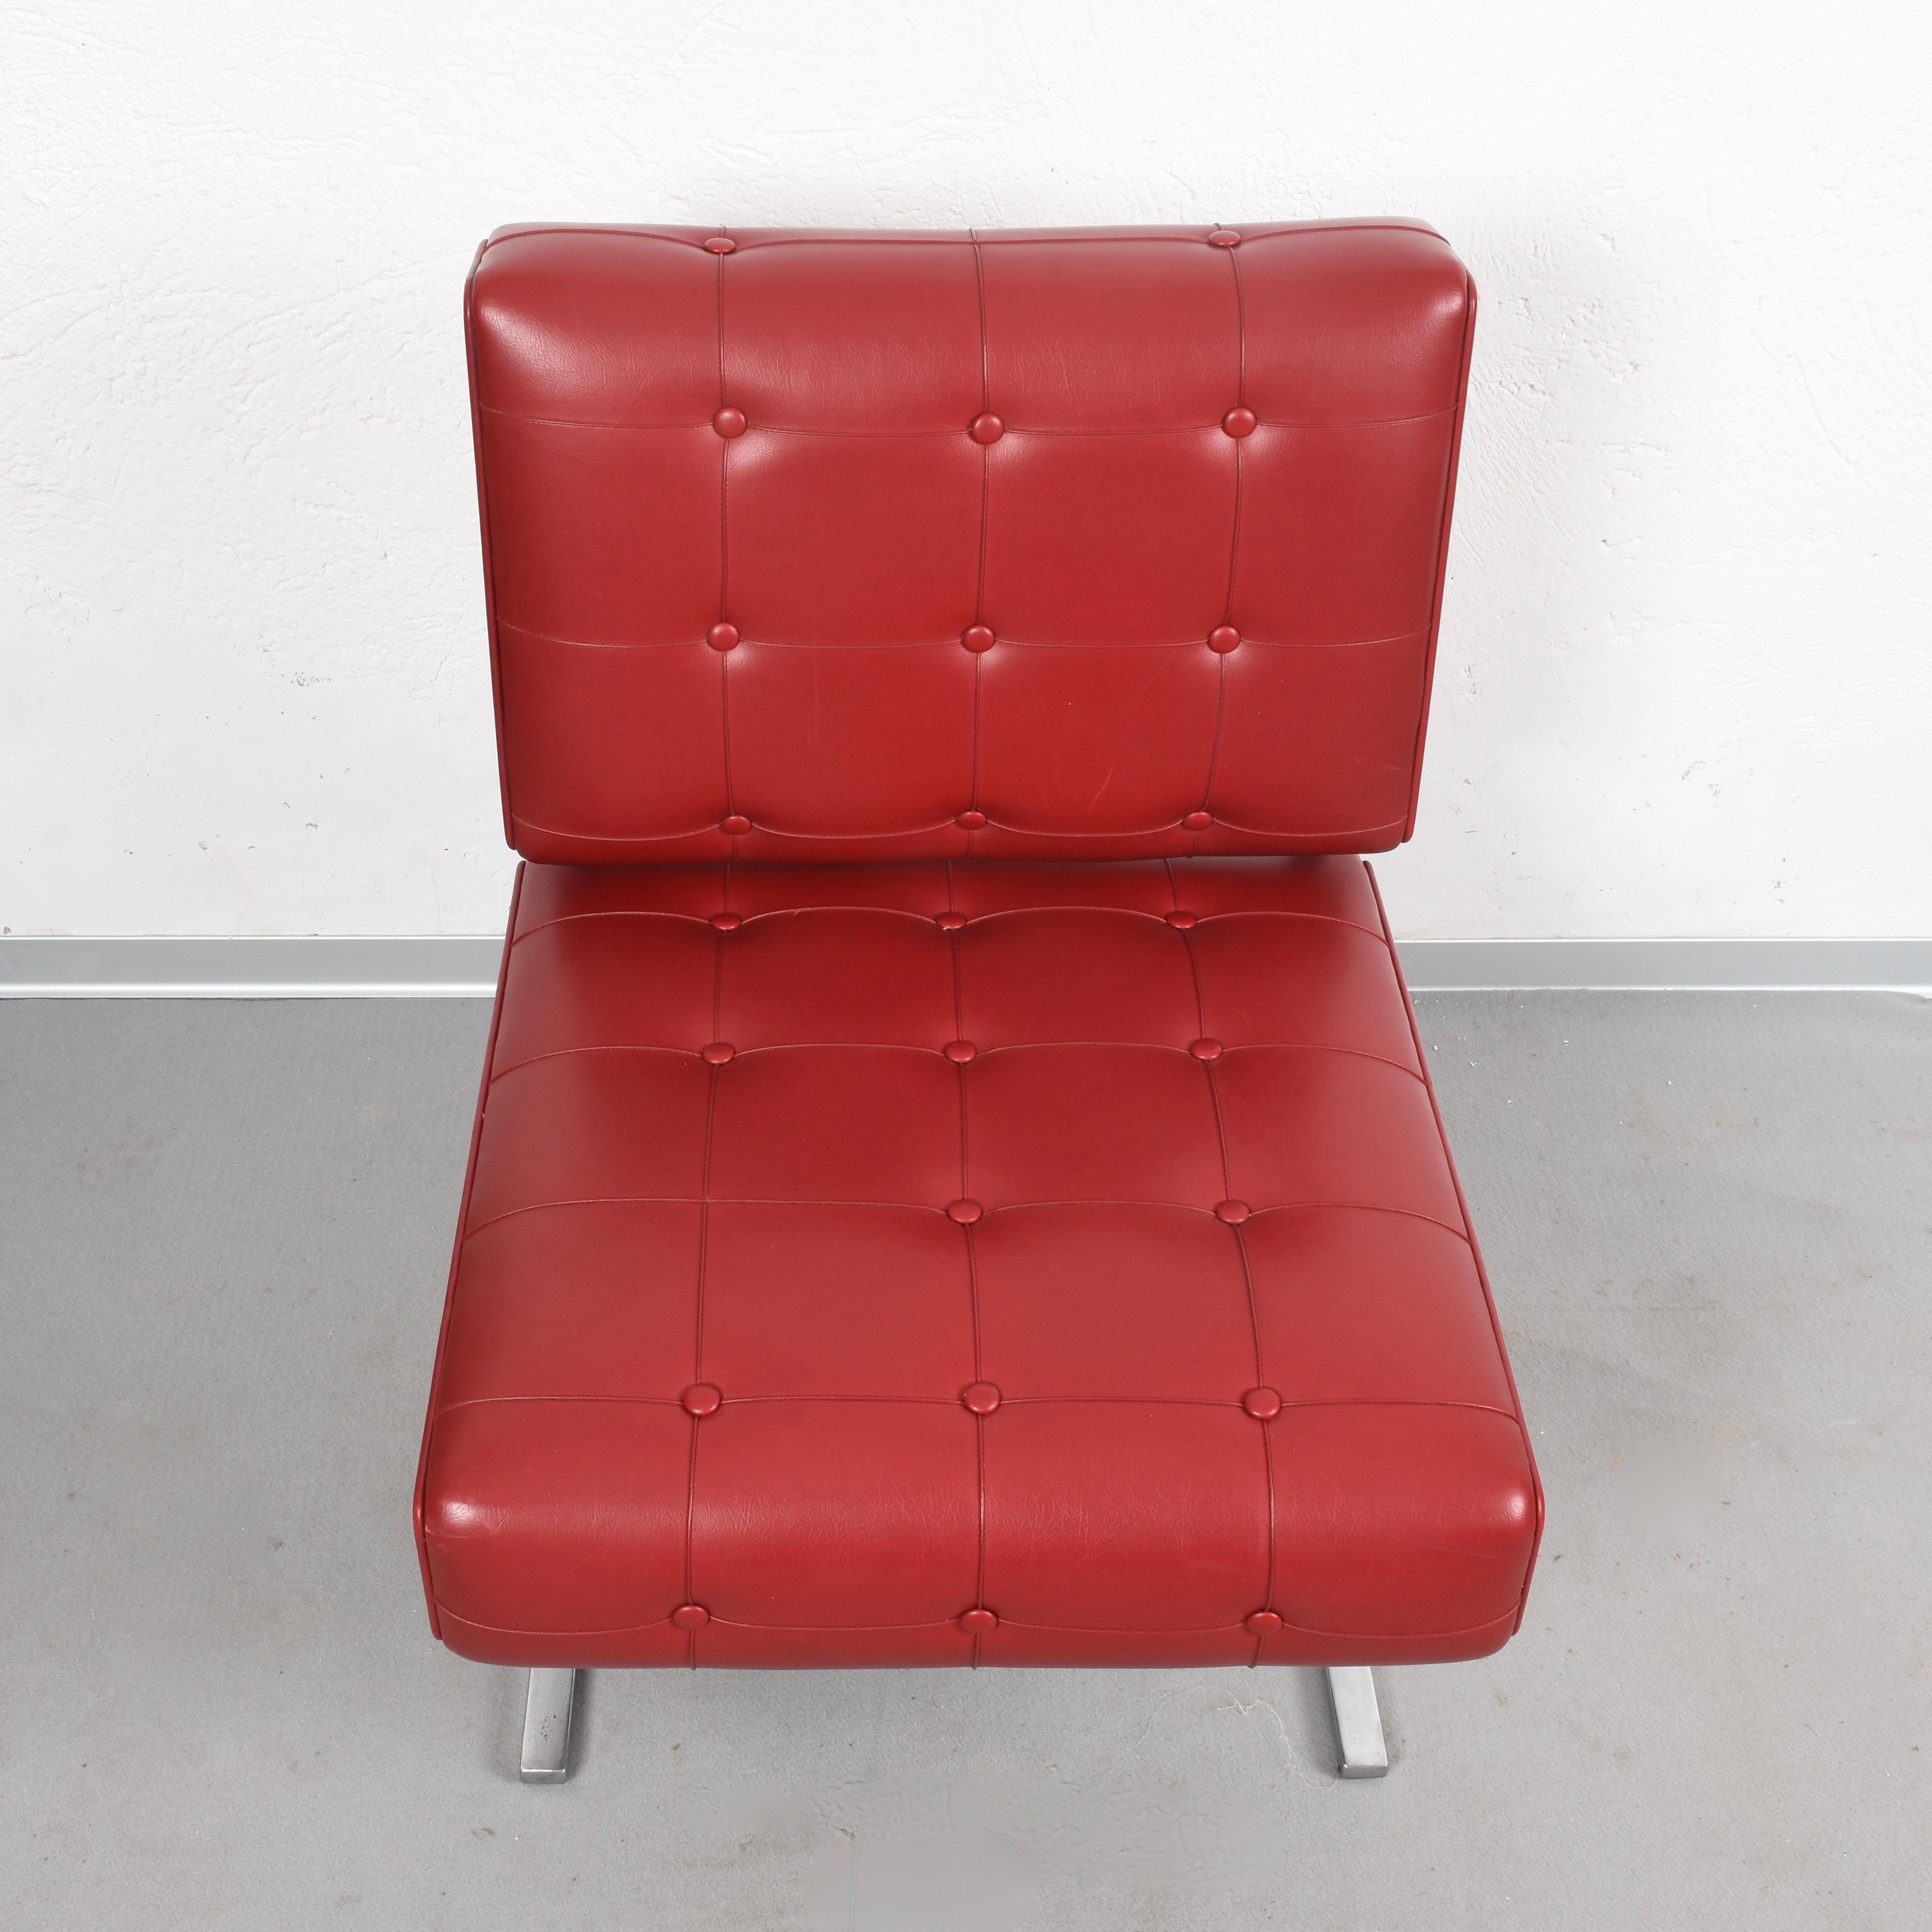 Italian Pair of Steel Armchairs Skay Capitonne Red, Style Hausmann De Sede Italy 1950s For Sale